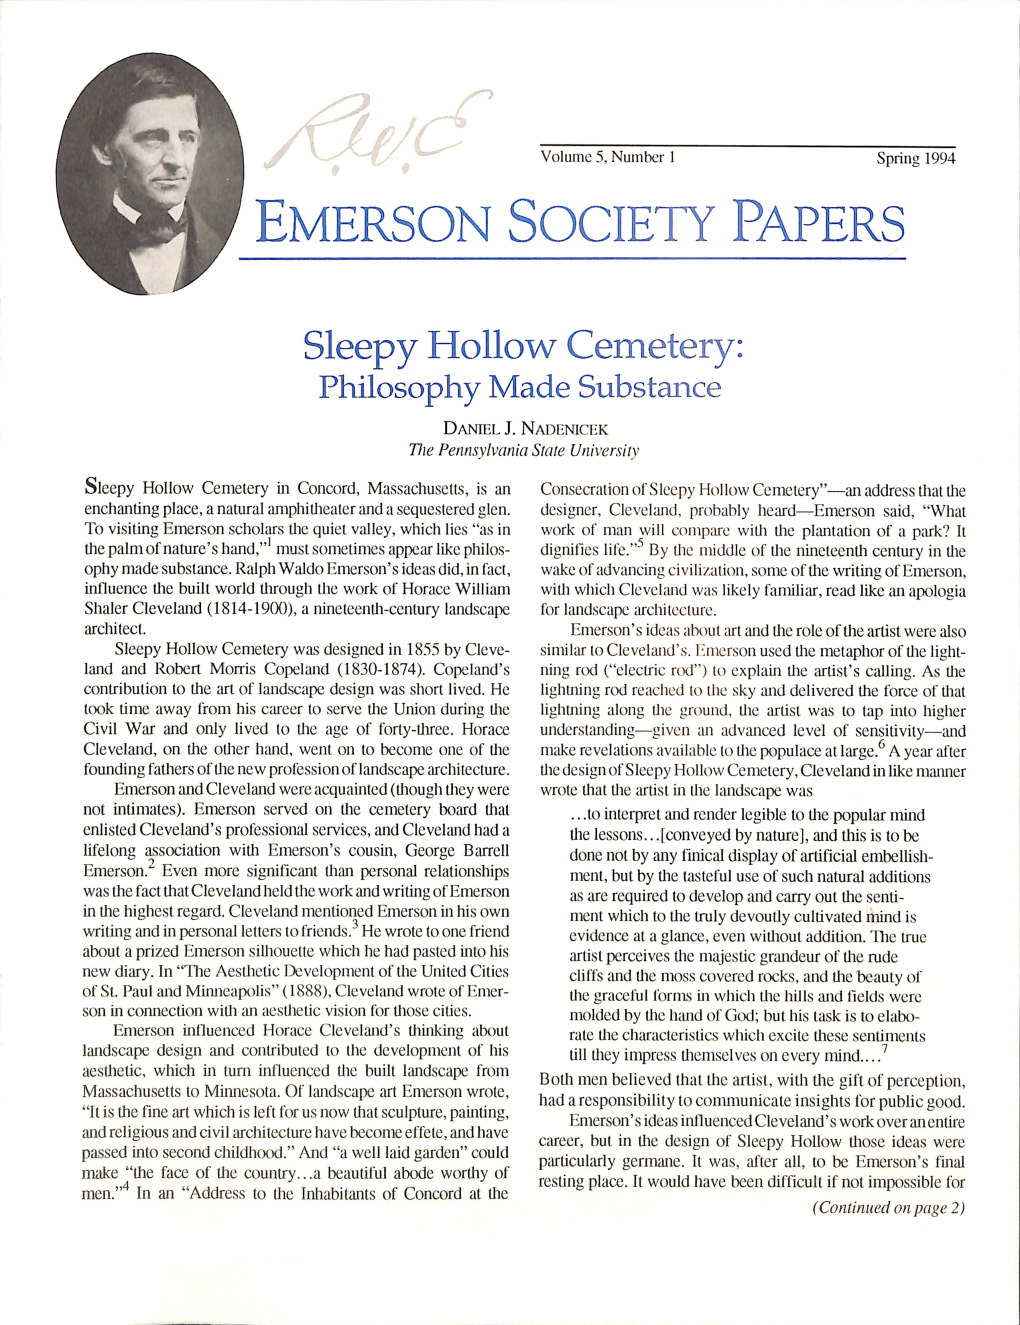 Emerson Society Papers